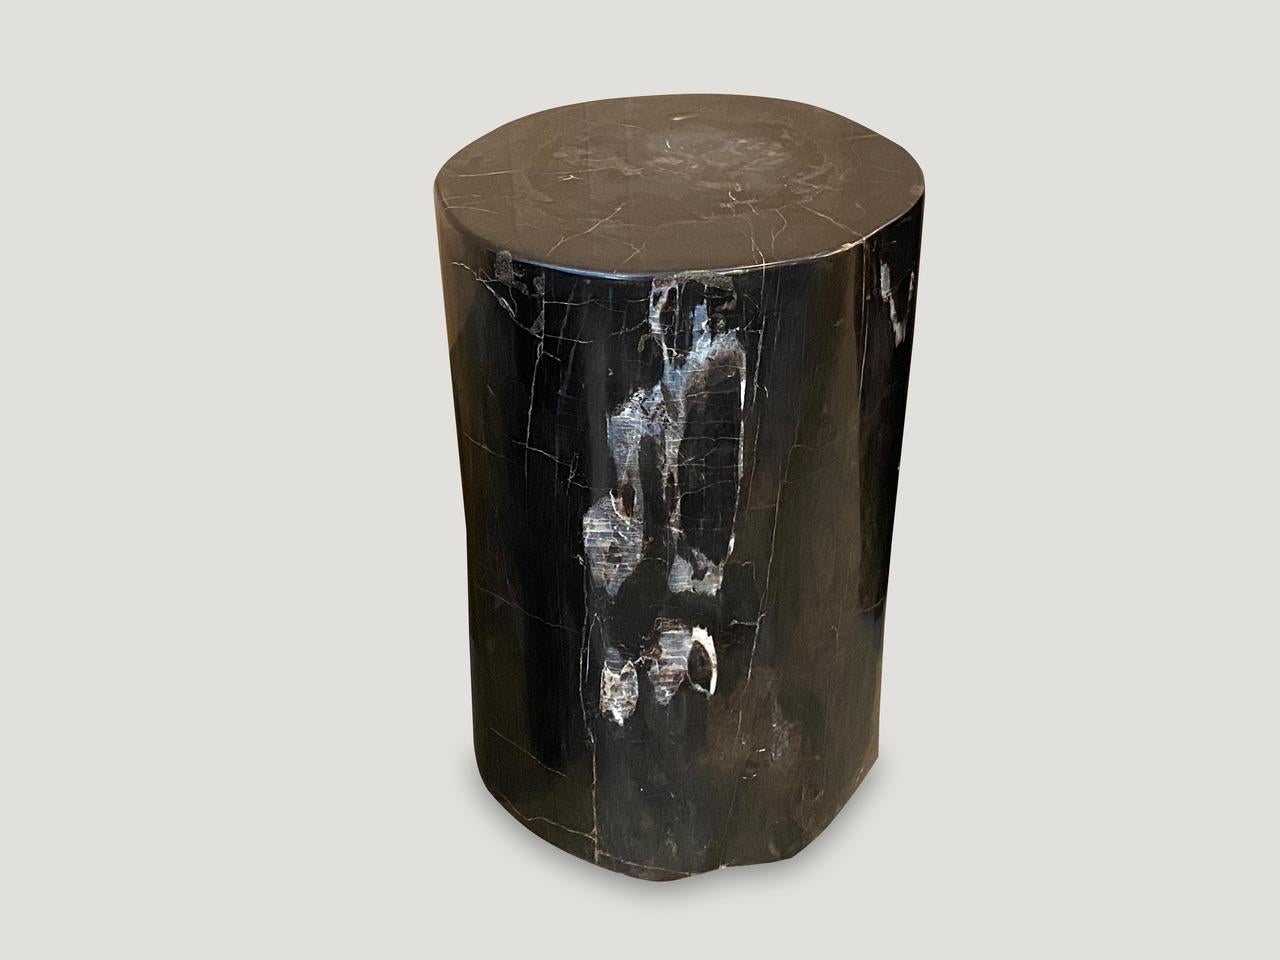 Super smooth petrified wood side table. It’s fascinating how Mother Nature produces these stunning 40 million year old petrified teak logs with such contrasting and natural patterns throughout. Modern yet with so much history. We have a collection